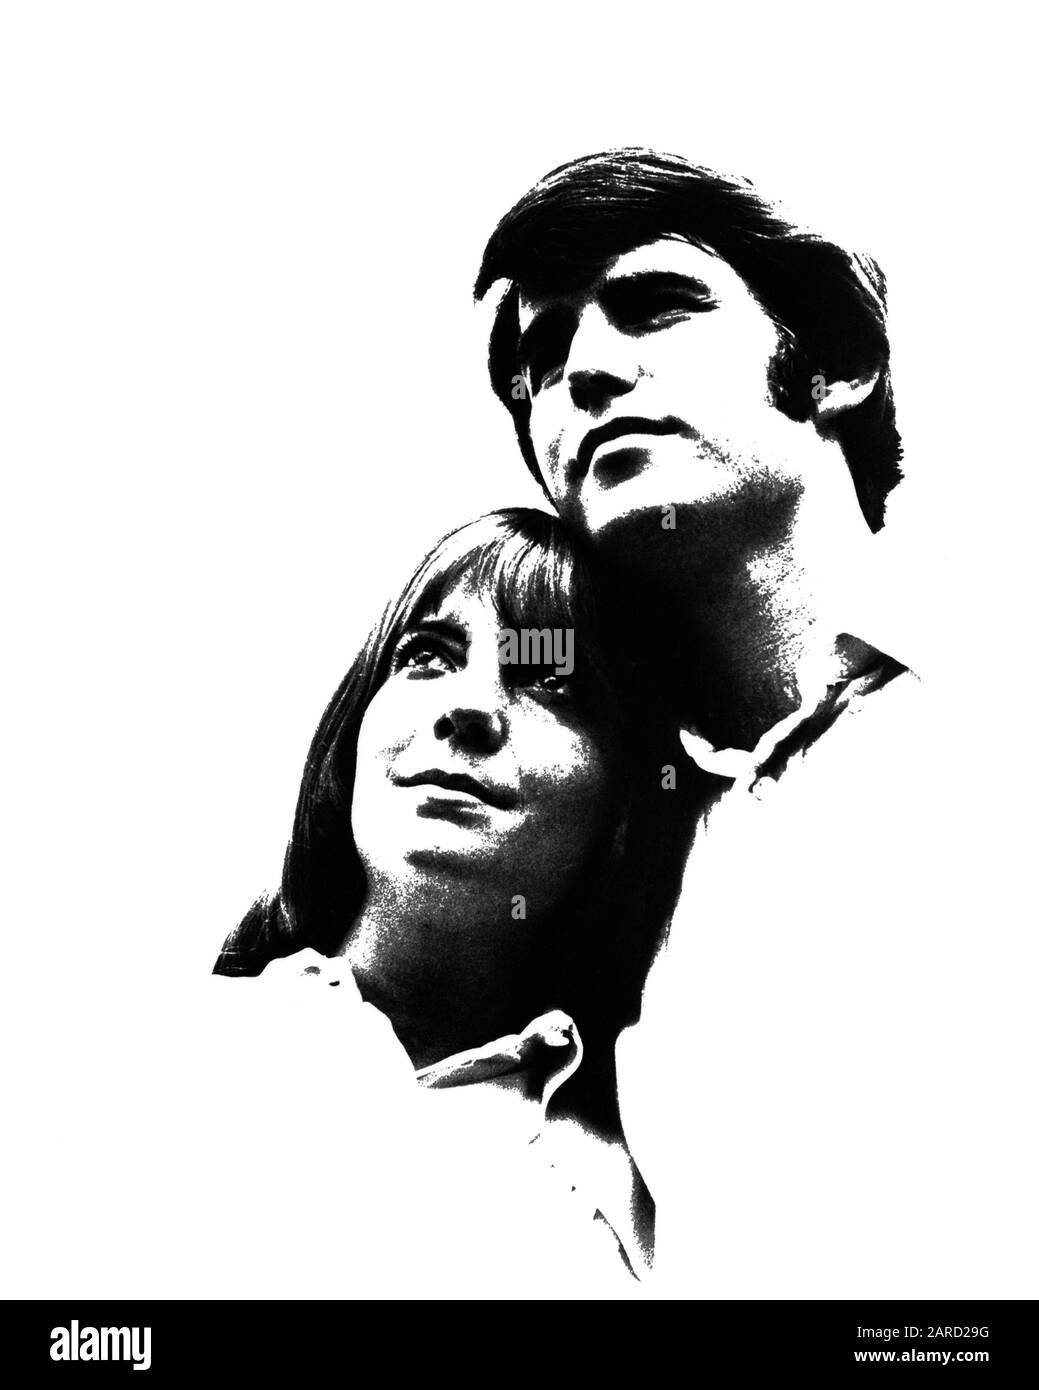 1970s POSTERIZED GRAPHIC EFFECT SYMBOLIC PORTRAIT OF SERIOUS YOUNG COUPLE WOMAN RESTING HER HEAD ON MAN SHOULDER - r22688 HAR001 HARS FEMALES MARRIED SPOUSE HUSBANDS HOME LIFE COPY SPACE FRIENDSHIP LADIES PERSONS THOUGHTFUL CARING MALES SYMBOLS B&W PARTNER RESTING GOALS DREAMS HAPPINESS HEAD AND SHOULDERS PRIDE RELATIONSHIPS CONCEPT CONNECTION CONCEPTUAL MAN'S SINCERE PERSONAL ATTACHMENT SOLEMN SYMBOLIC AFFECTION CONCEPTS COOPERATION EMOTION FOCUSED INTENSE TOGETHERNESS WIVES YOUNG ADULT MAN YOUNG ADULT WOMAN BLACK AND WHITE CAREFUL CAUCASIAN ETHNICITY EARNEST GRAPHIC EFFECT HAR001 INTENT Stock Photo